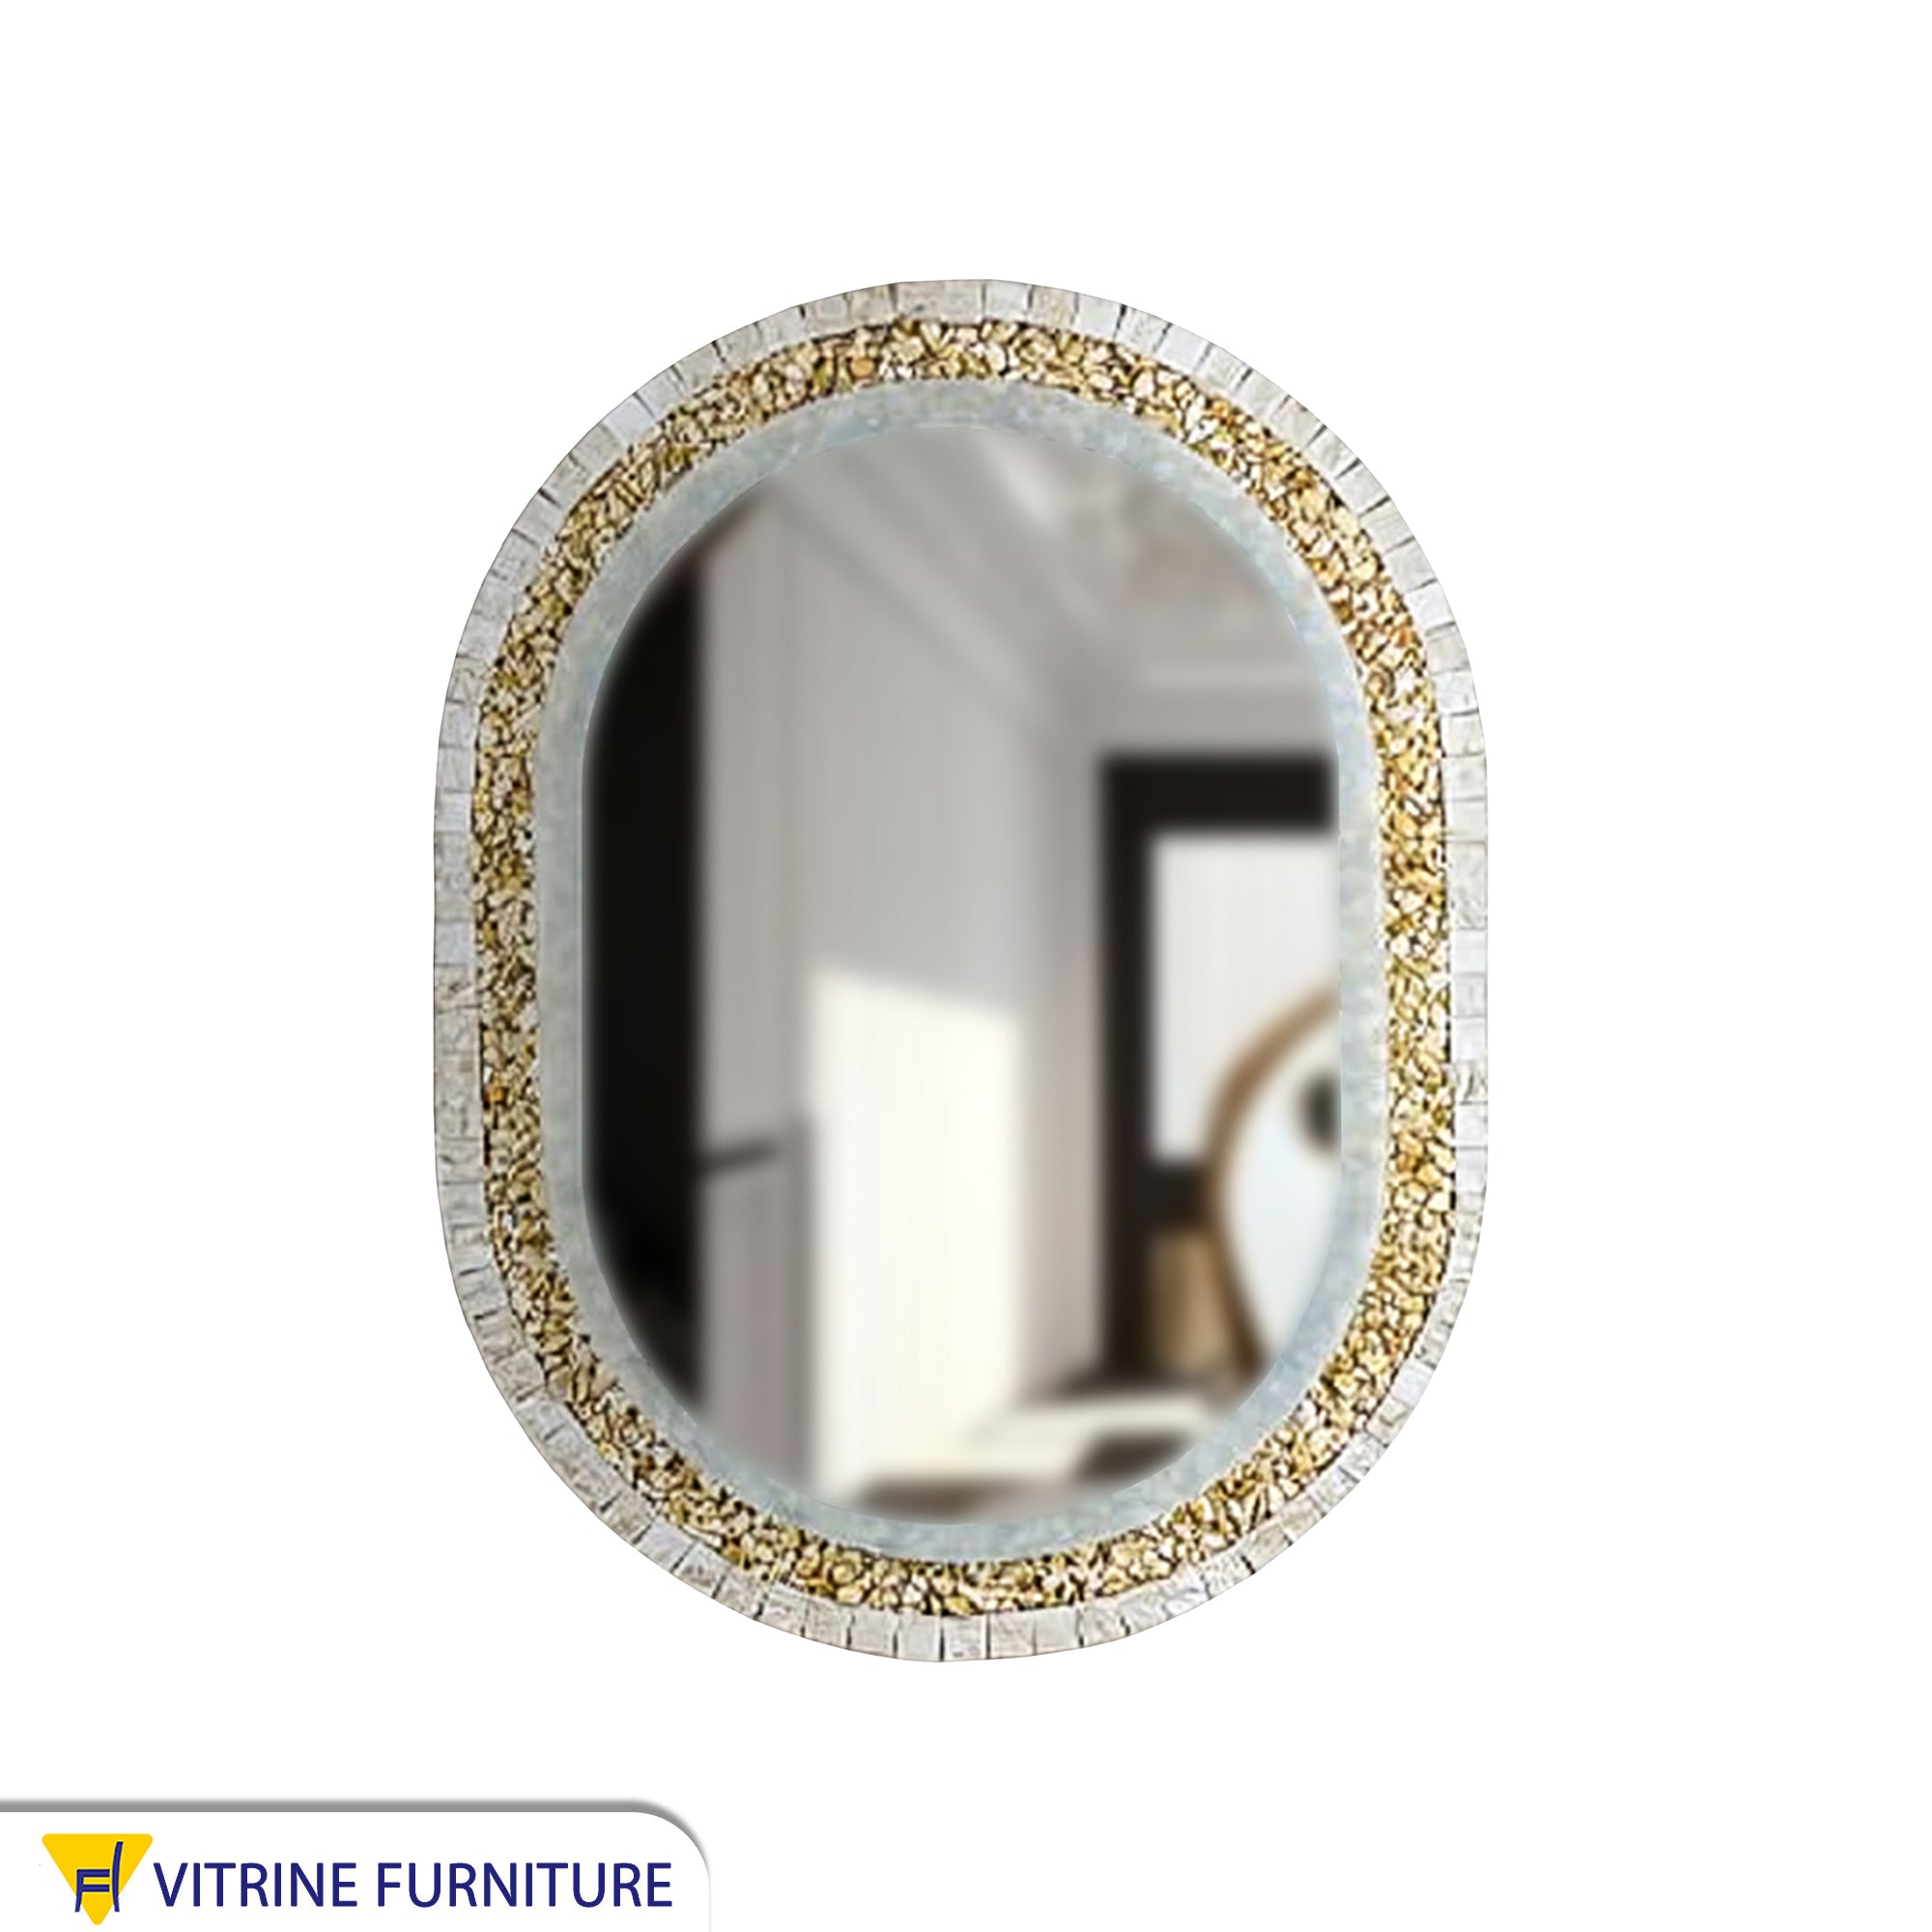 LED mirror with a golden marble and stone frame